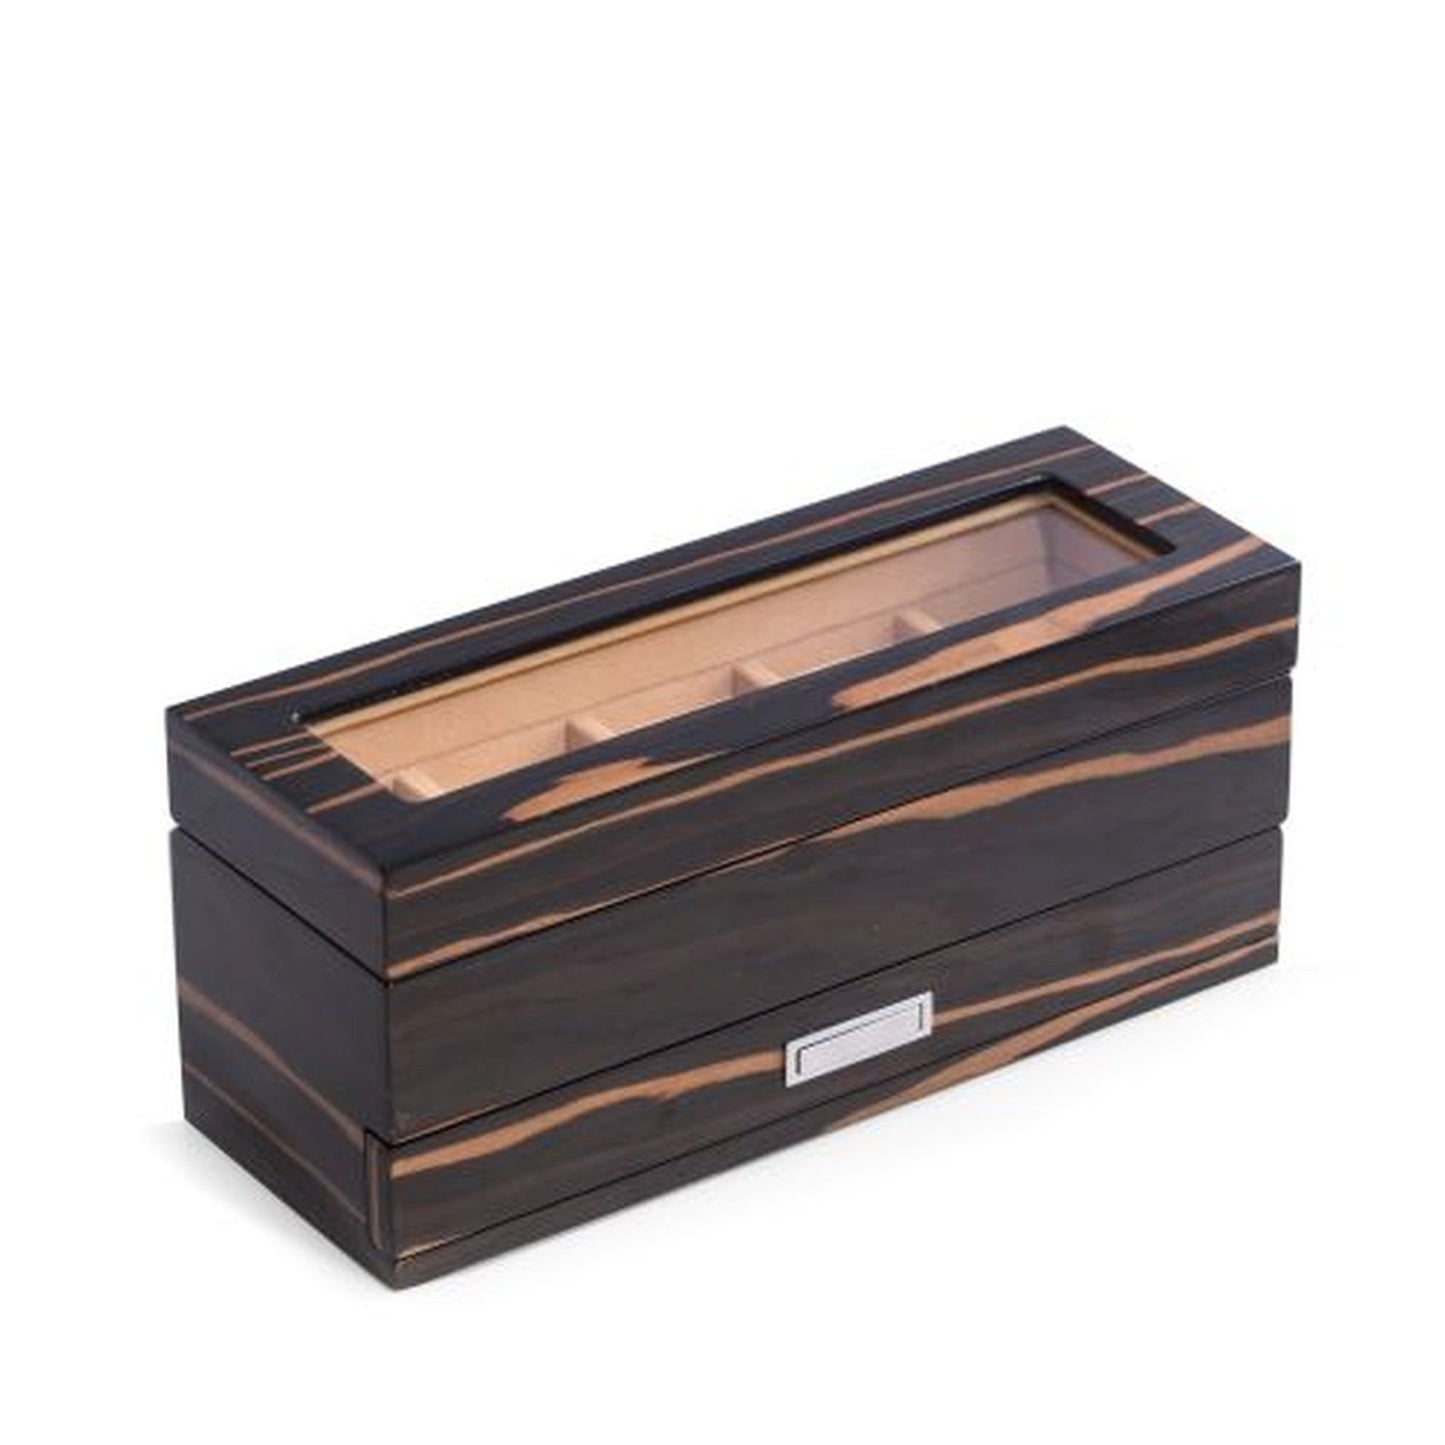 Bey Berk Lacquered "Ebony" Wood 5 Watch Box With Glass Top